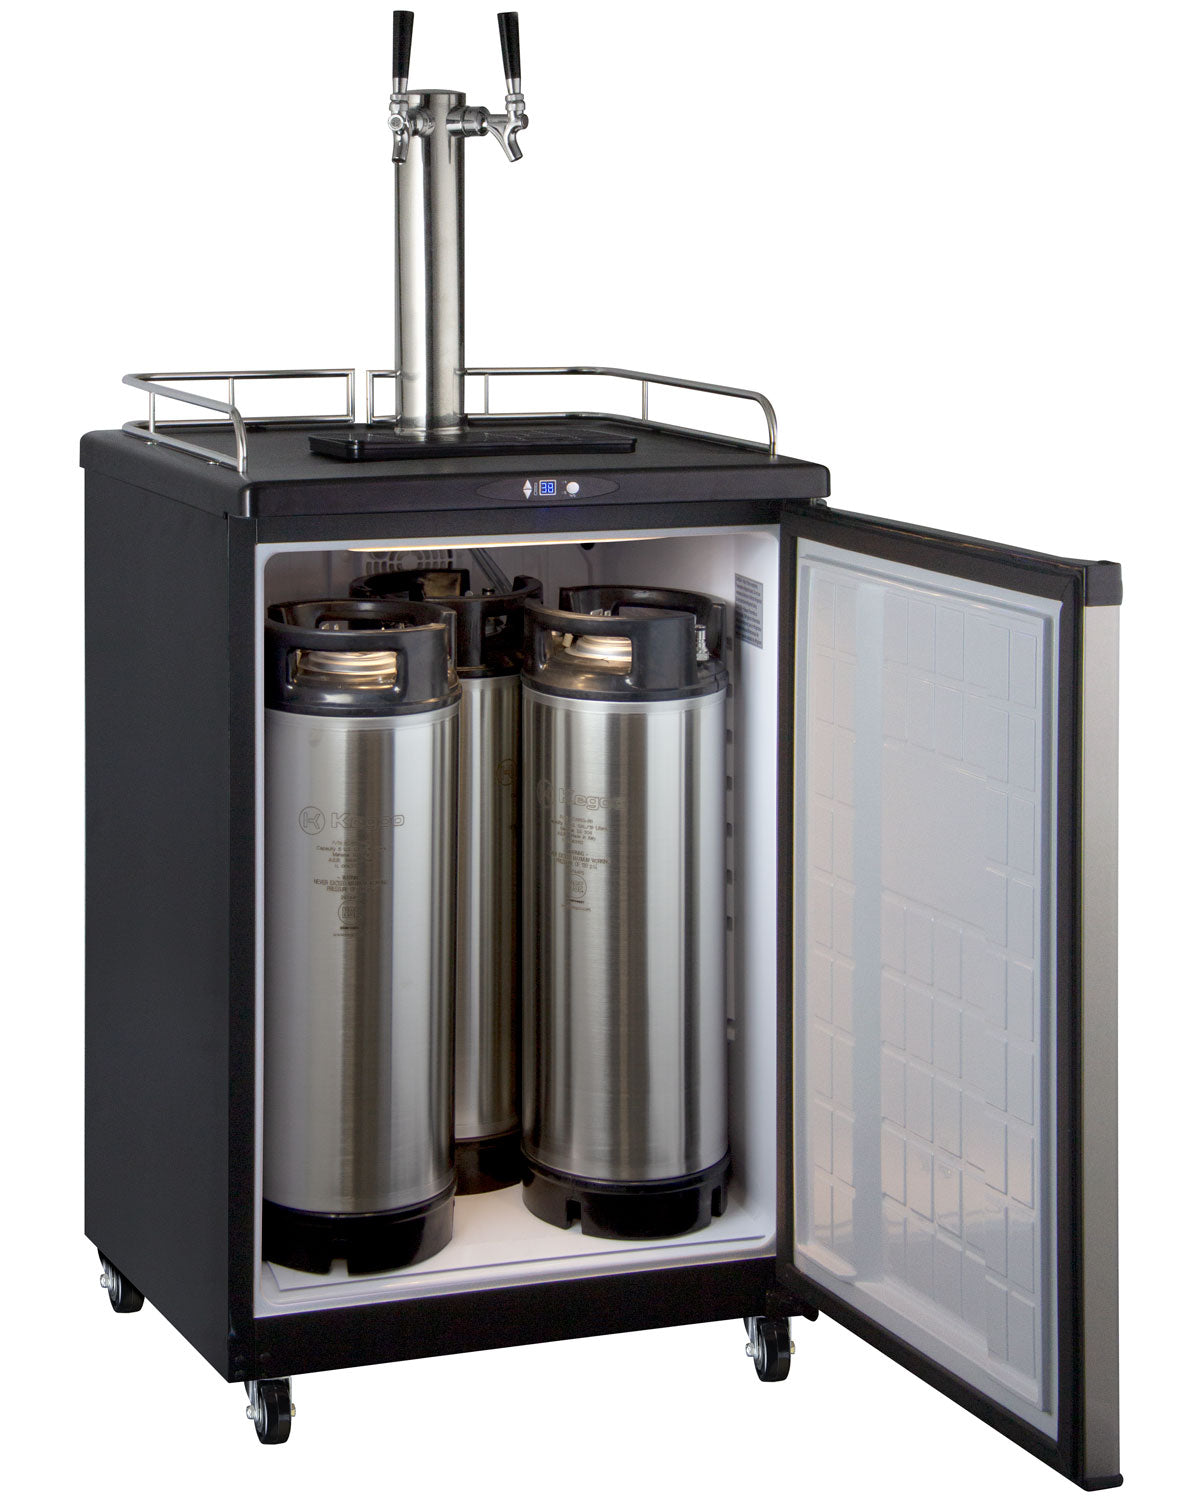 Kegco 24" Wide Homebrew Dual Tap Stainless Steel Commercial/Residential Kegerator